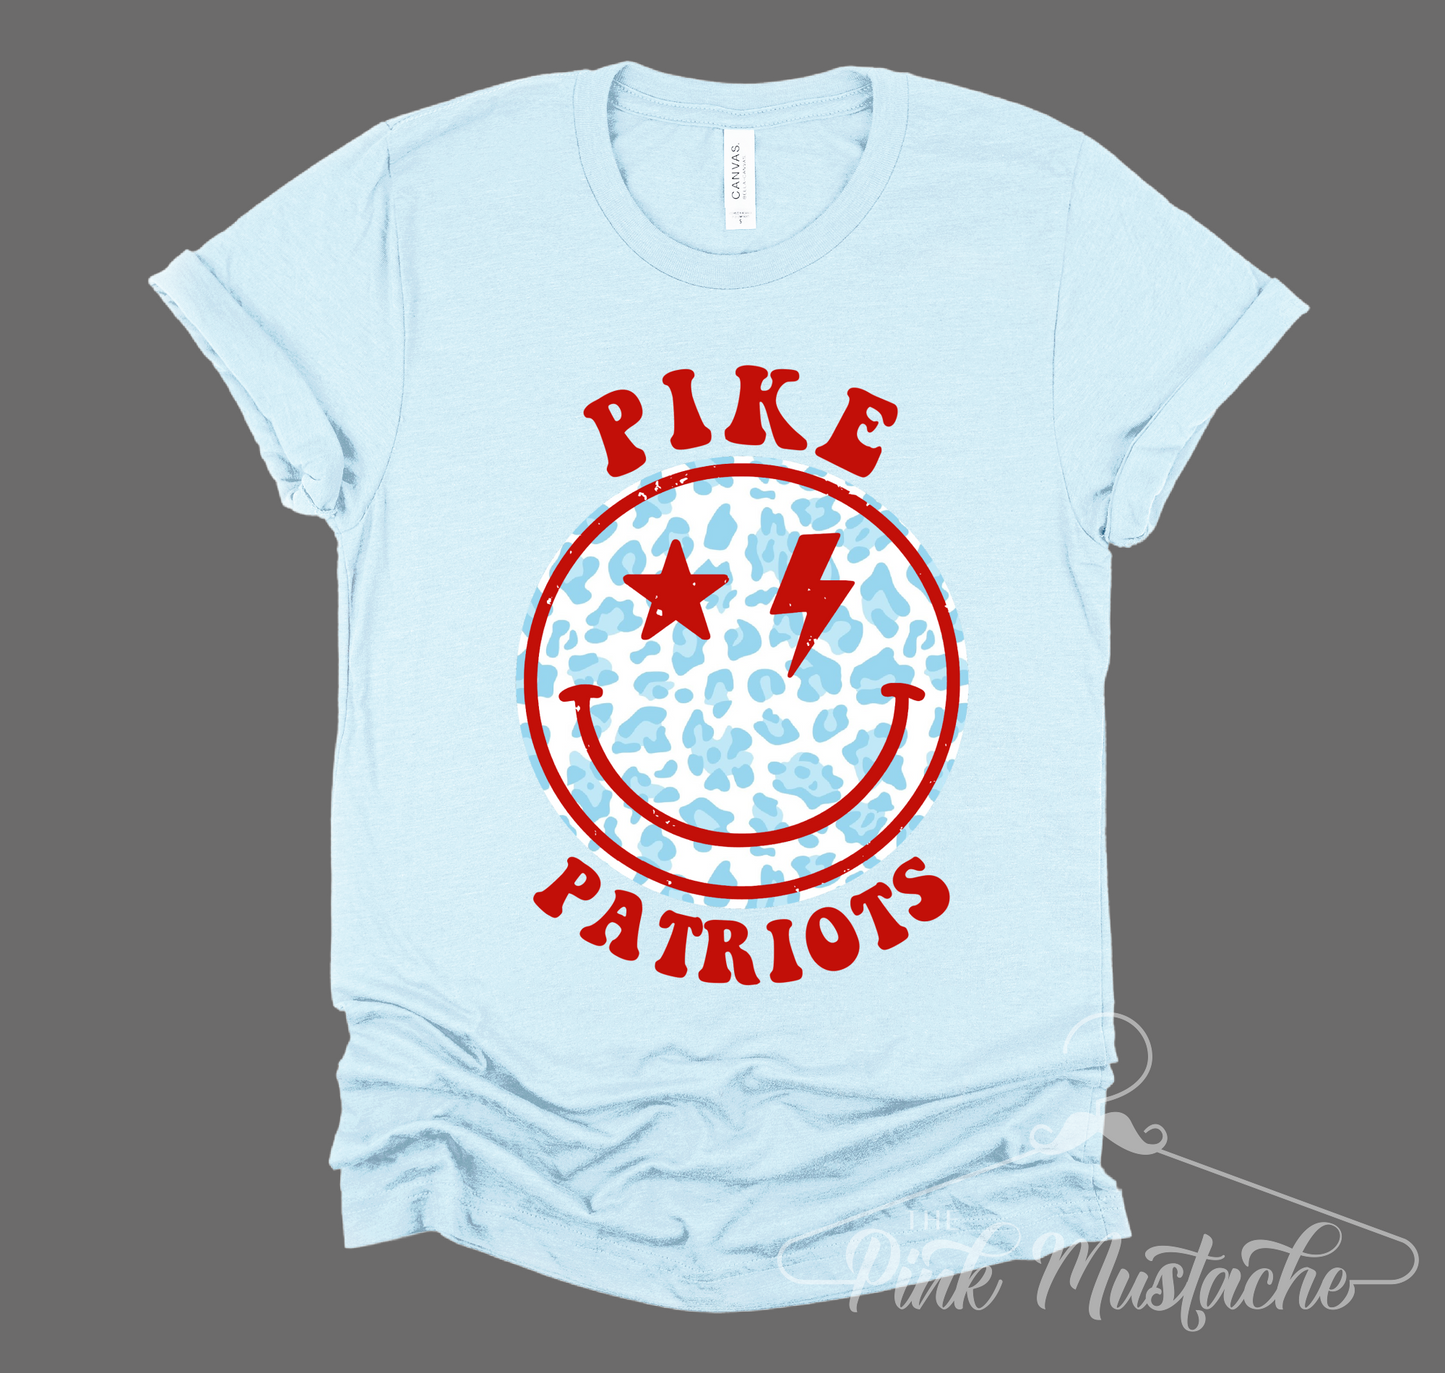 PIKE Patriots Distressed Smiley Unisex Shirt / Toddler, Youth, and Adult Sizes